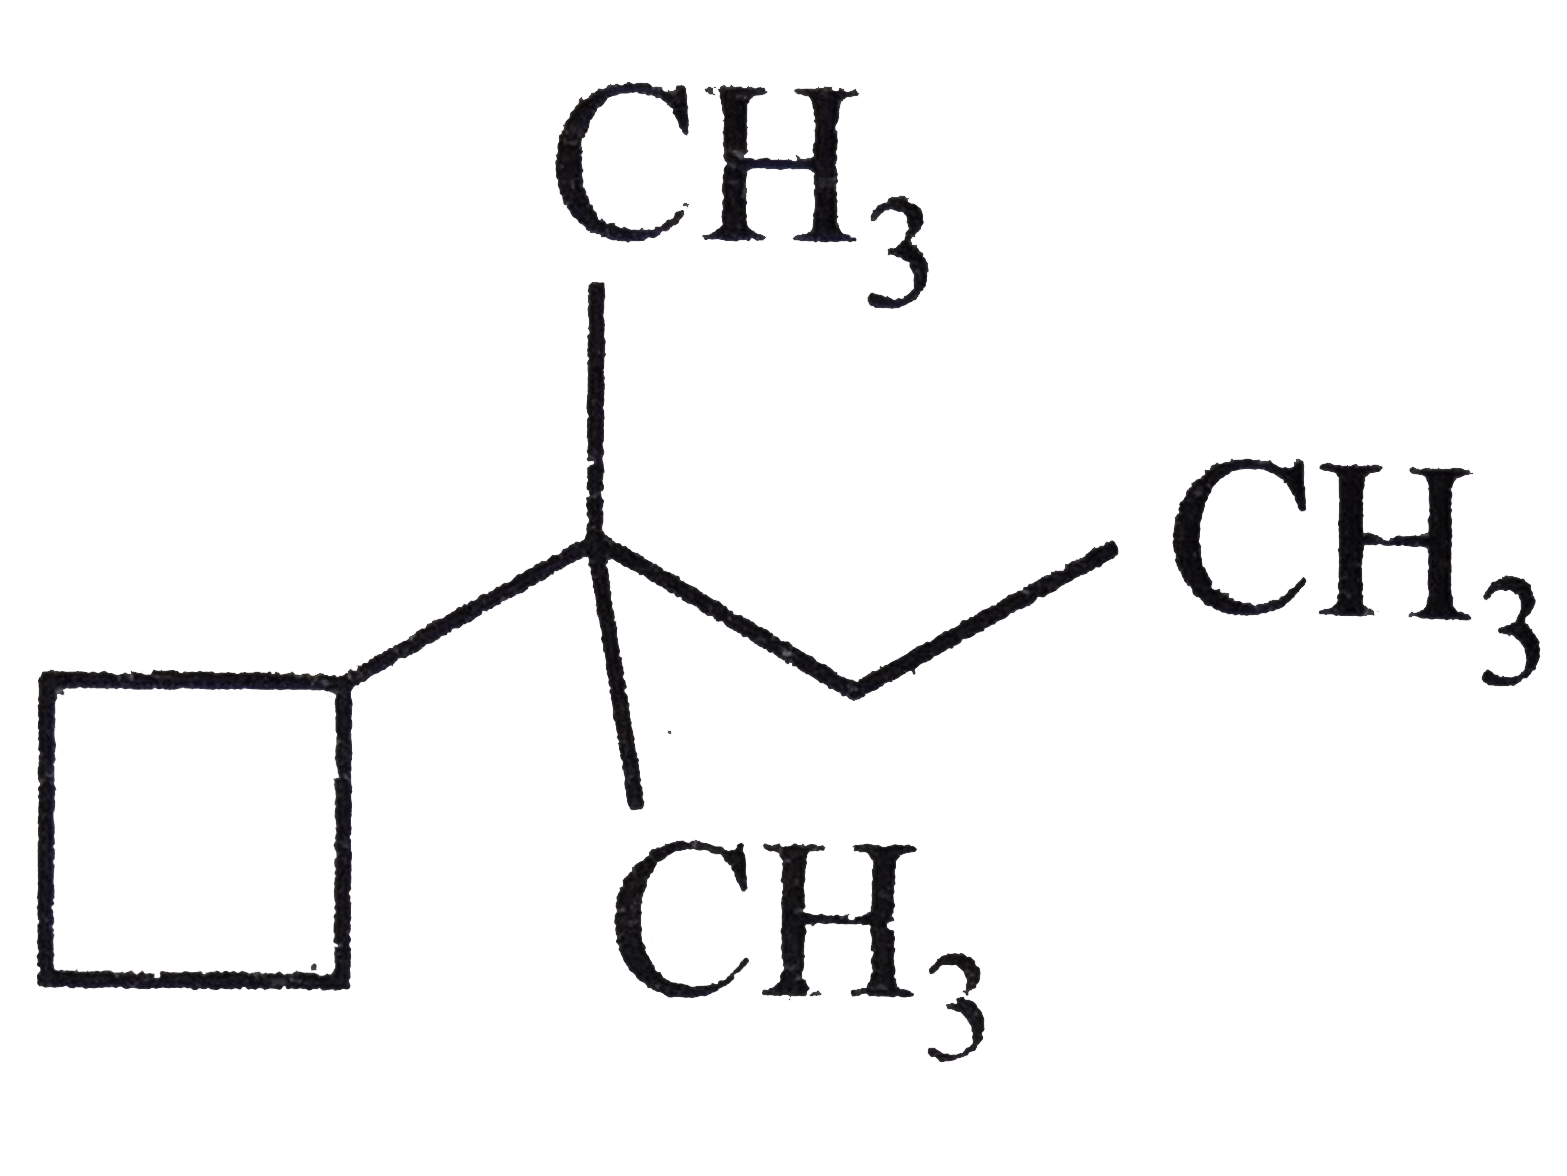 According to IUPAC convention, the correct name of the following compound is